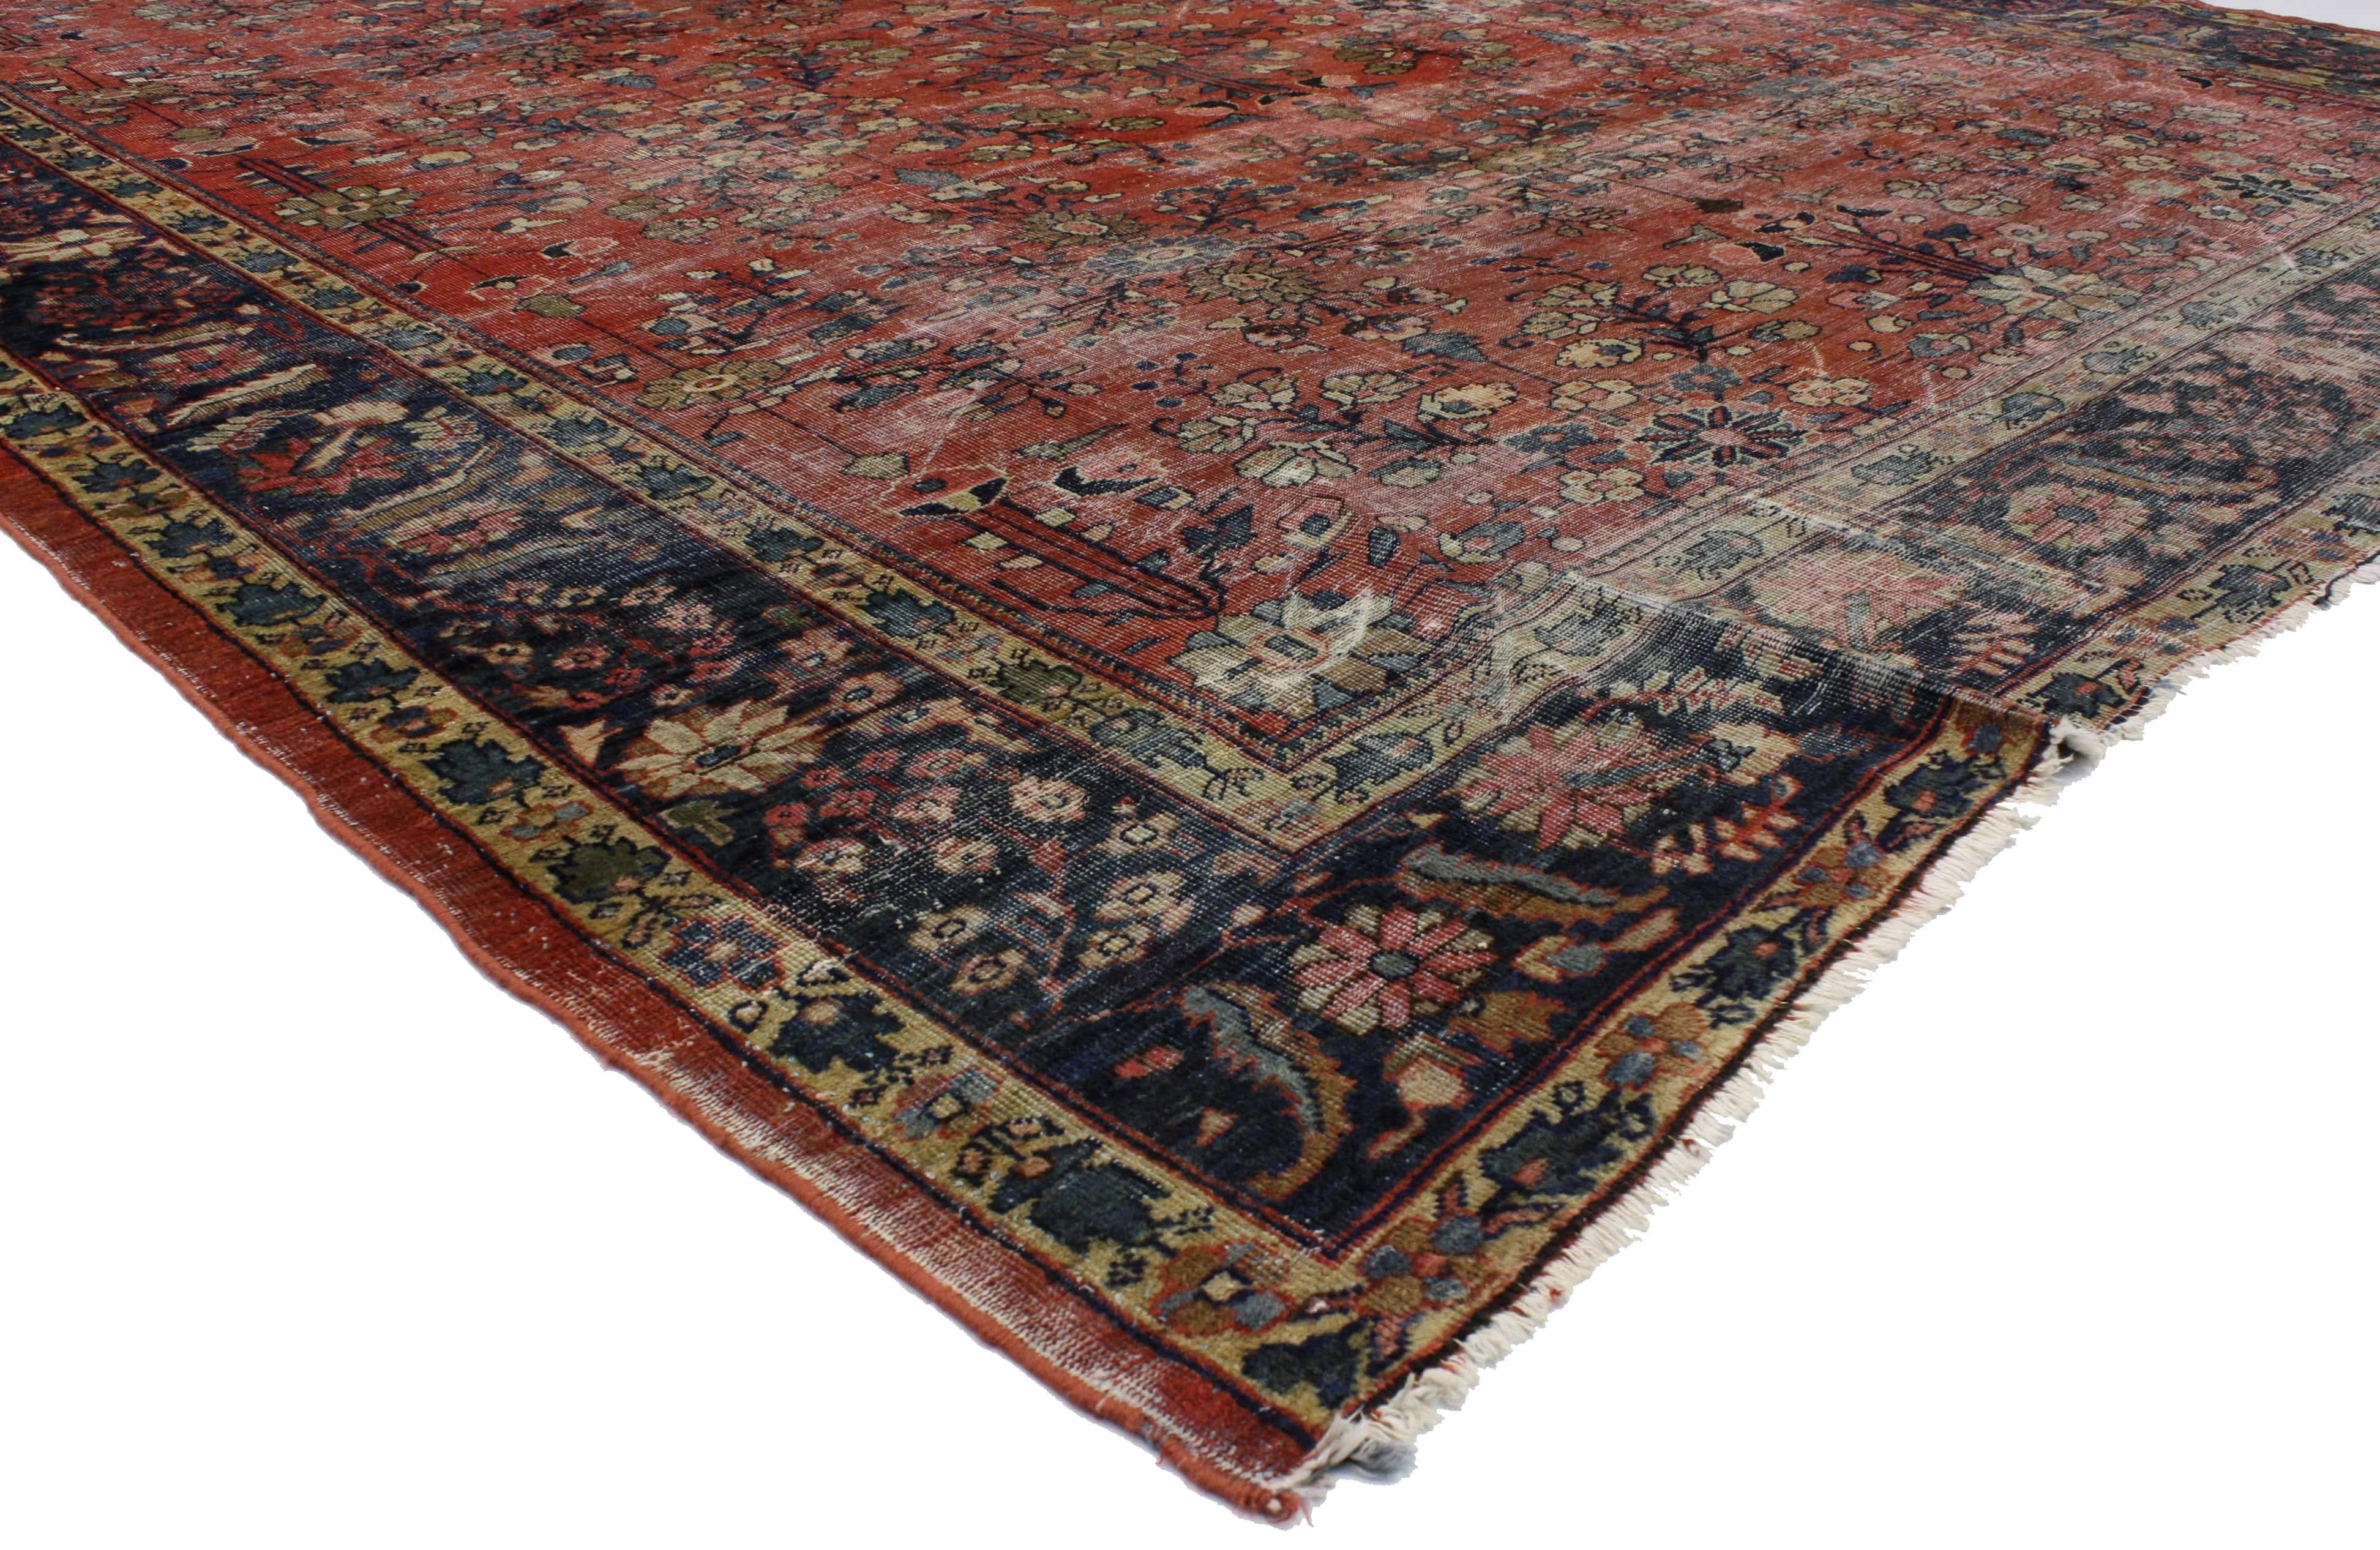 76704, distressed antique Persian Mahal rug with Modern Rustic English Style and Industrial Vibes. With its perfectly worn-in charm and rustic sensibility, this hand-knotted wool distressed antique Persian Mahal rug will take on a curated lived-in